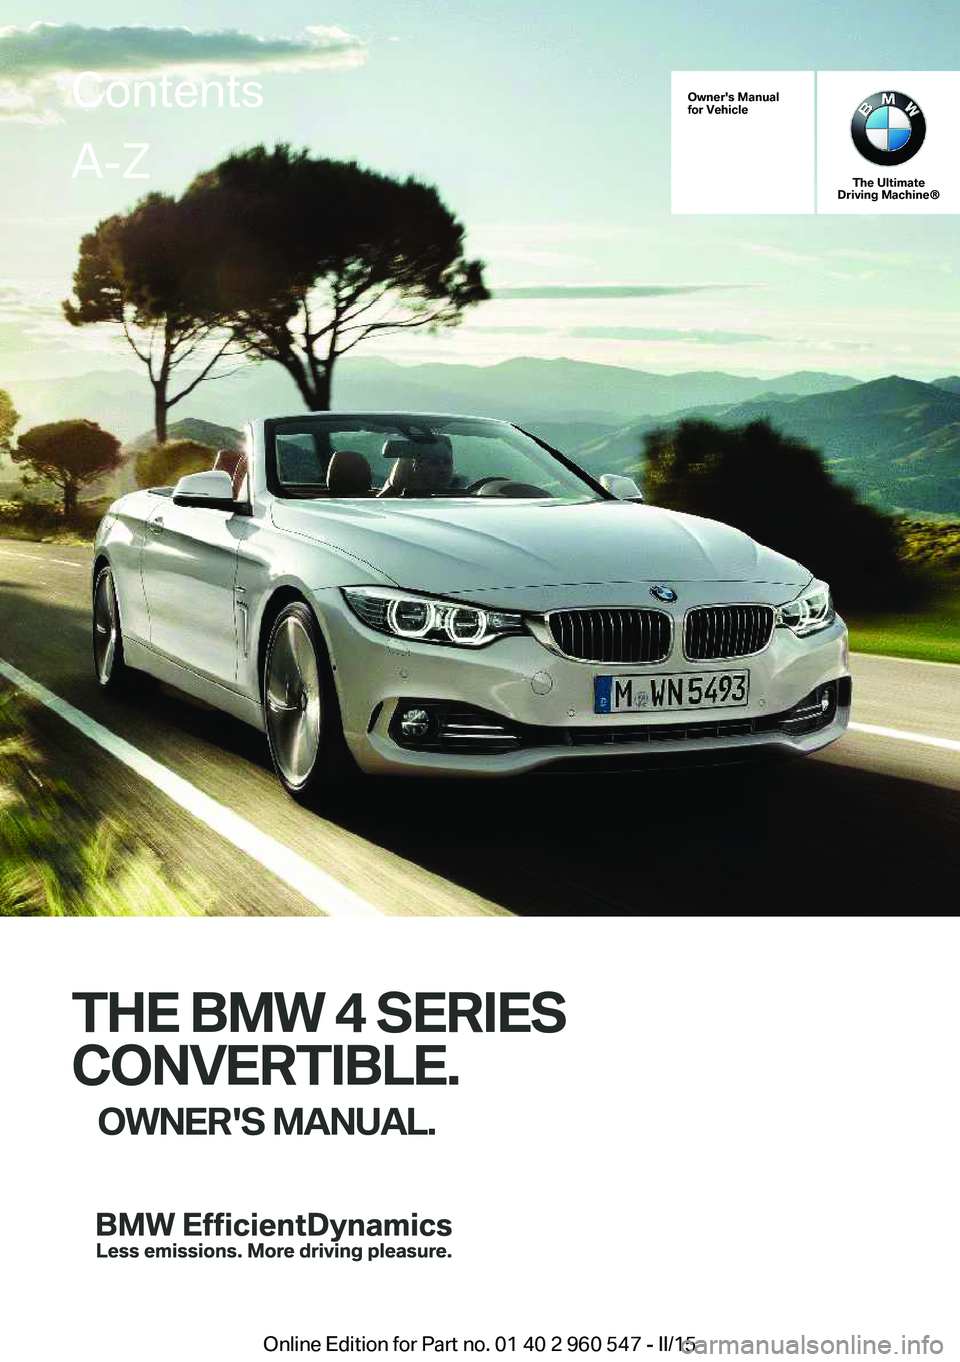 BMW 428I XDRIVE  CONVERTIBLE 2016  Owners Manual Owner's Manual
for Vehicle
The Ultimate
Driving Machine®
THE BMW 4 SERIES
CONVERTIBLE. OWNER'S MANUAL.
ContentsA-Z
Online Edition for Part no. 01 40 2 960 547 - II/15   